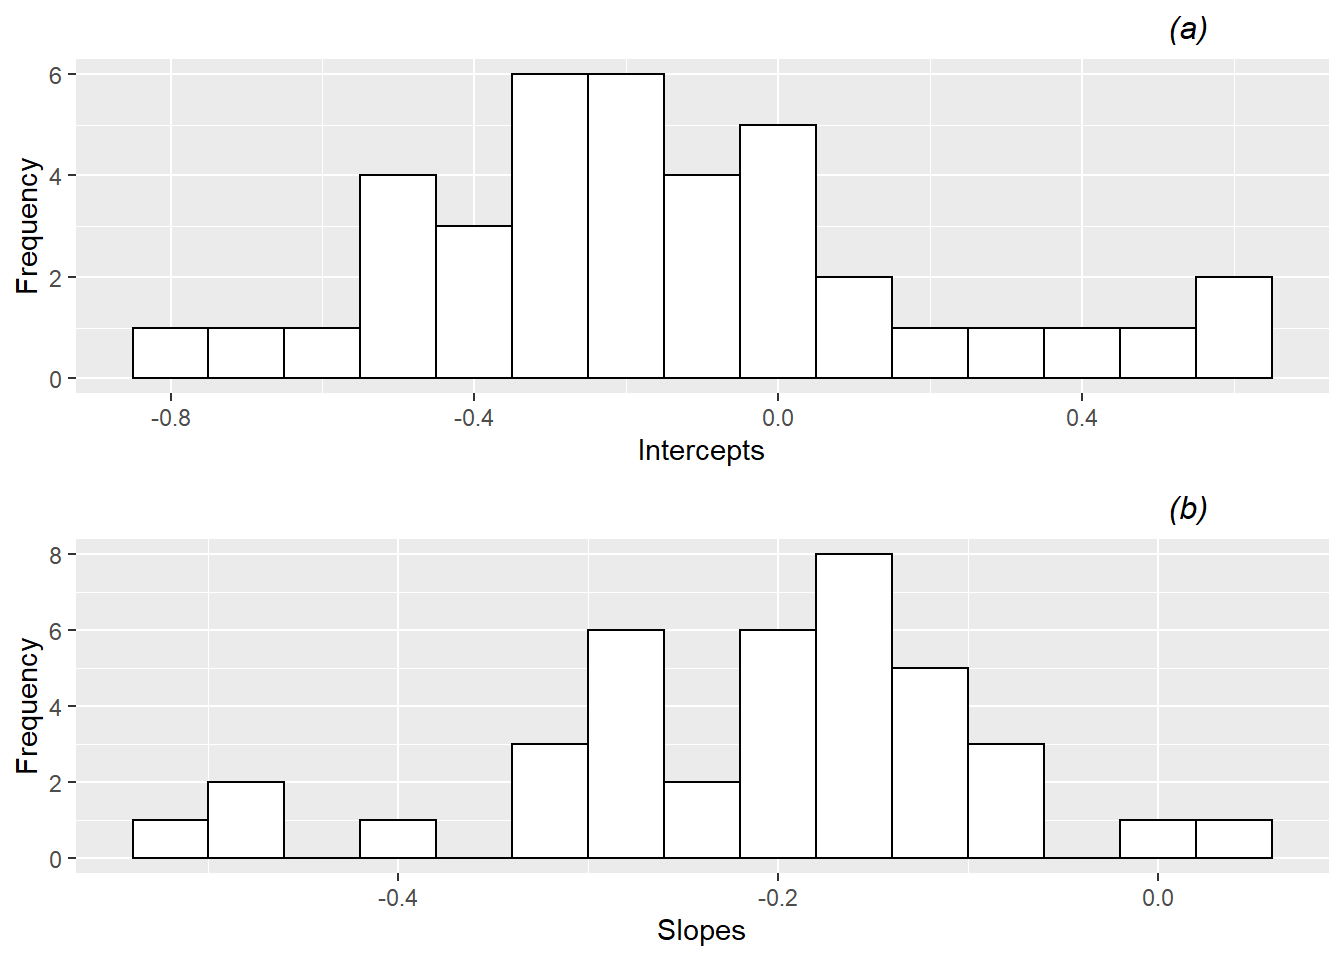 Histograms of (a) intercepts and (b) slopes from fitting simple logistic regression models by home team.